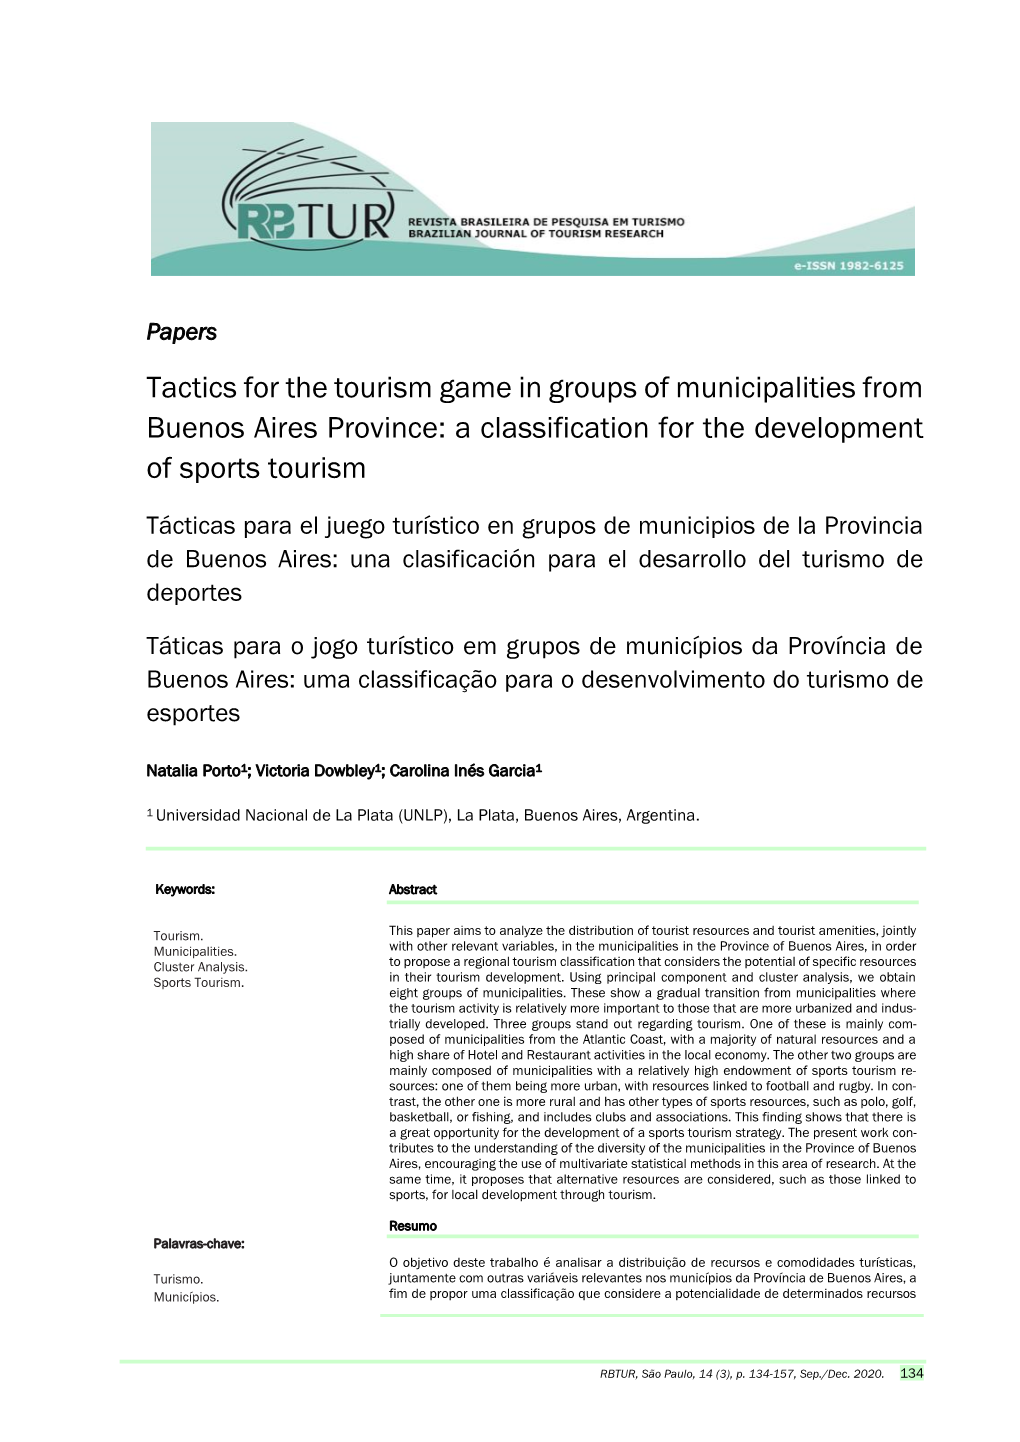 Tactics for the Tourism Game in Groups of Municipalities from Buenos Aires Province: a Classification for the Development of Sports Tourism